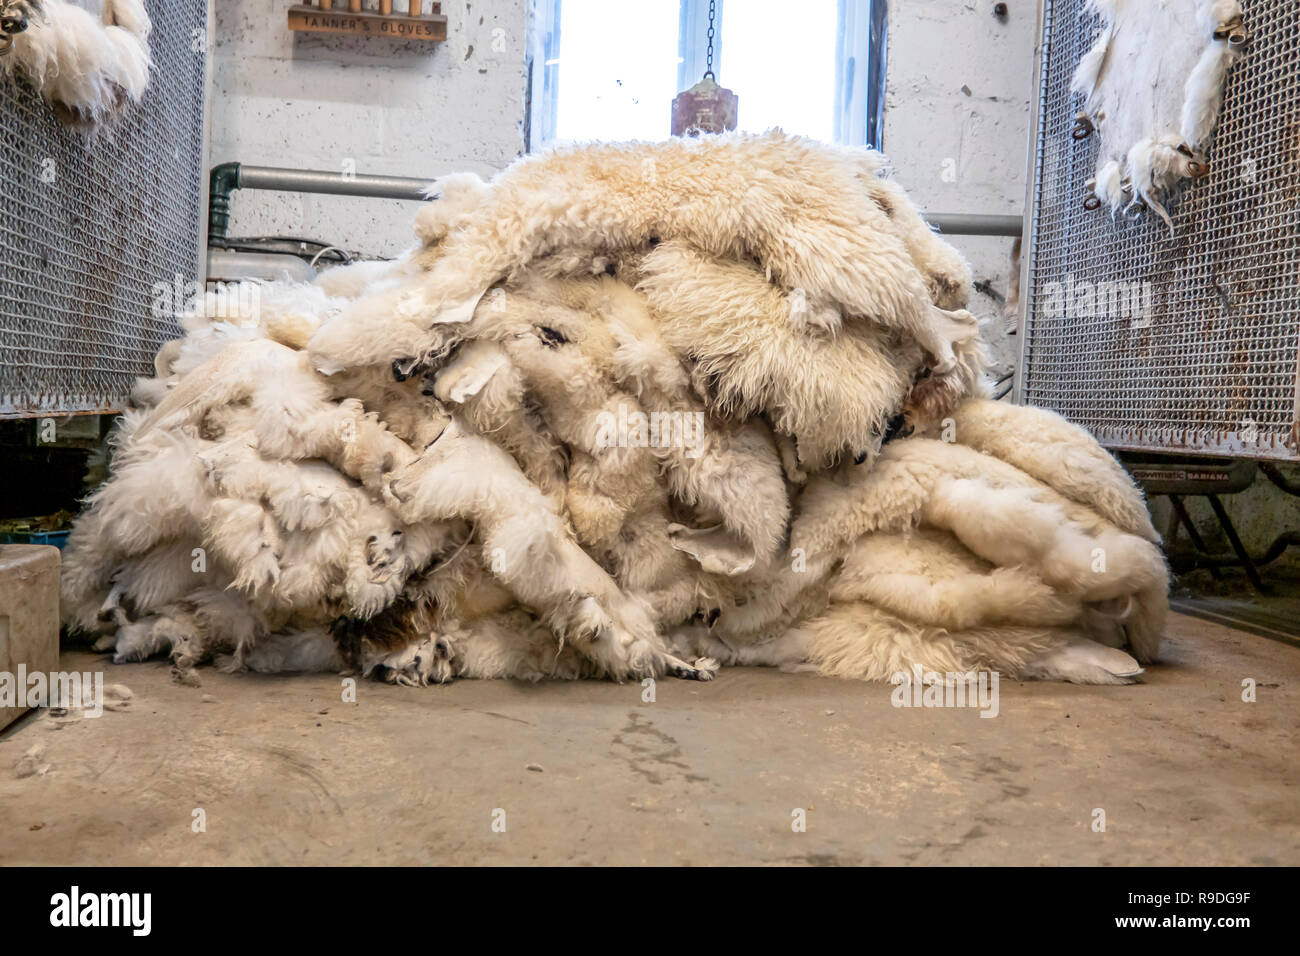 Traditional skin processing at tannery in Scotland. Stock Photo